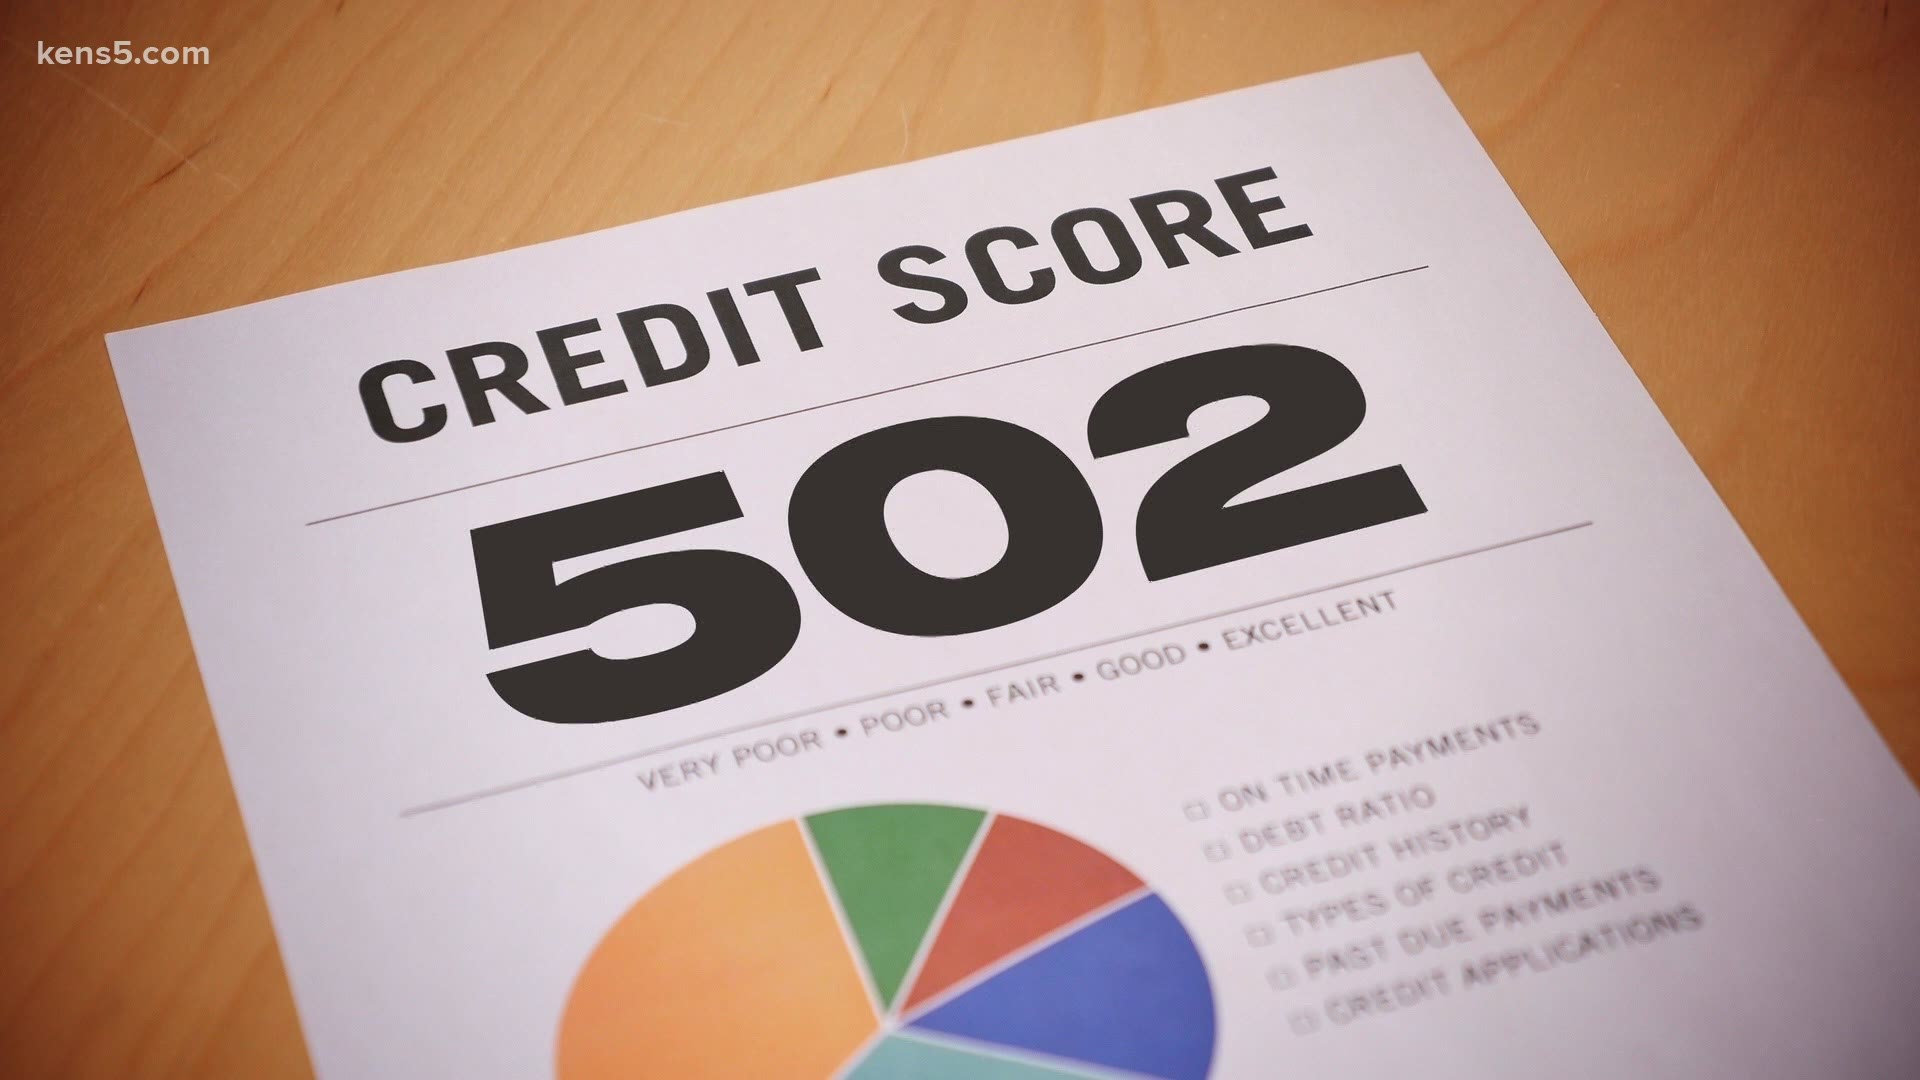 On average, most Americans have about $6,000 worth of credit card debt. That can have a big, negative impact on credit scores, but there are easy ways to fix that.